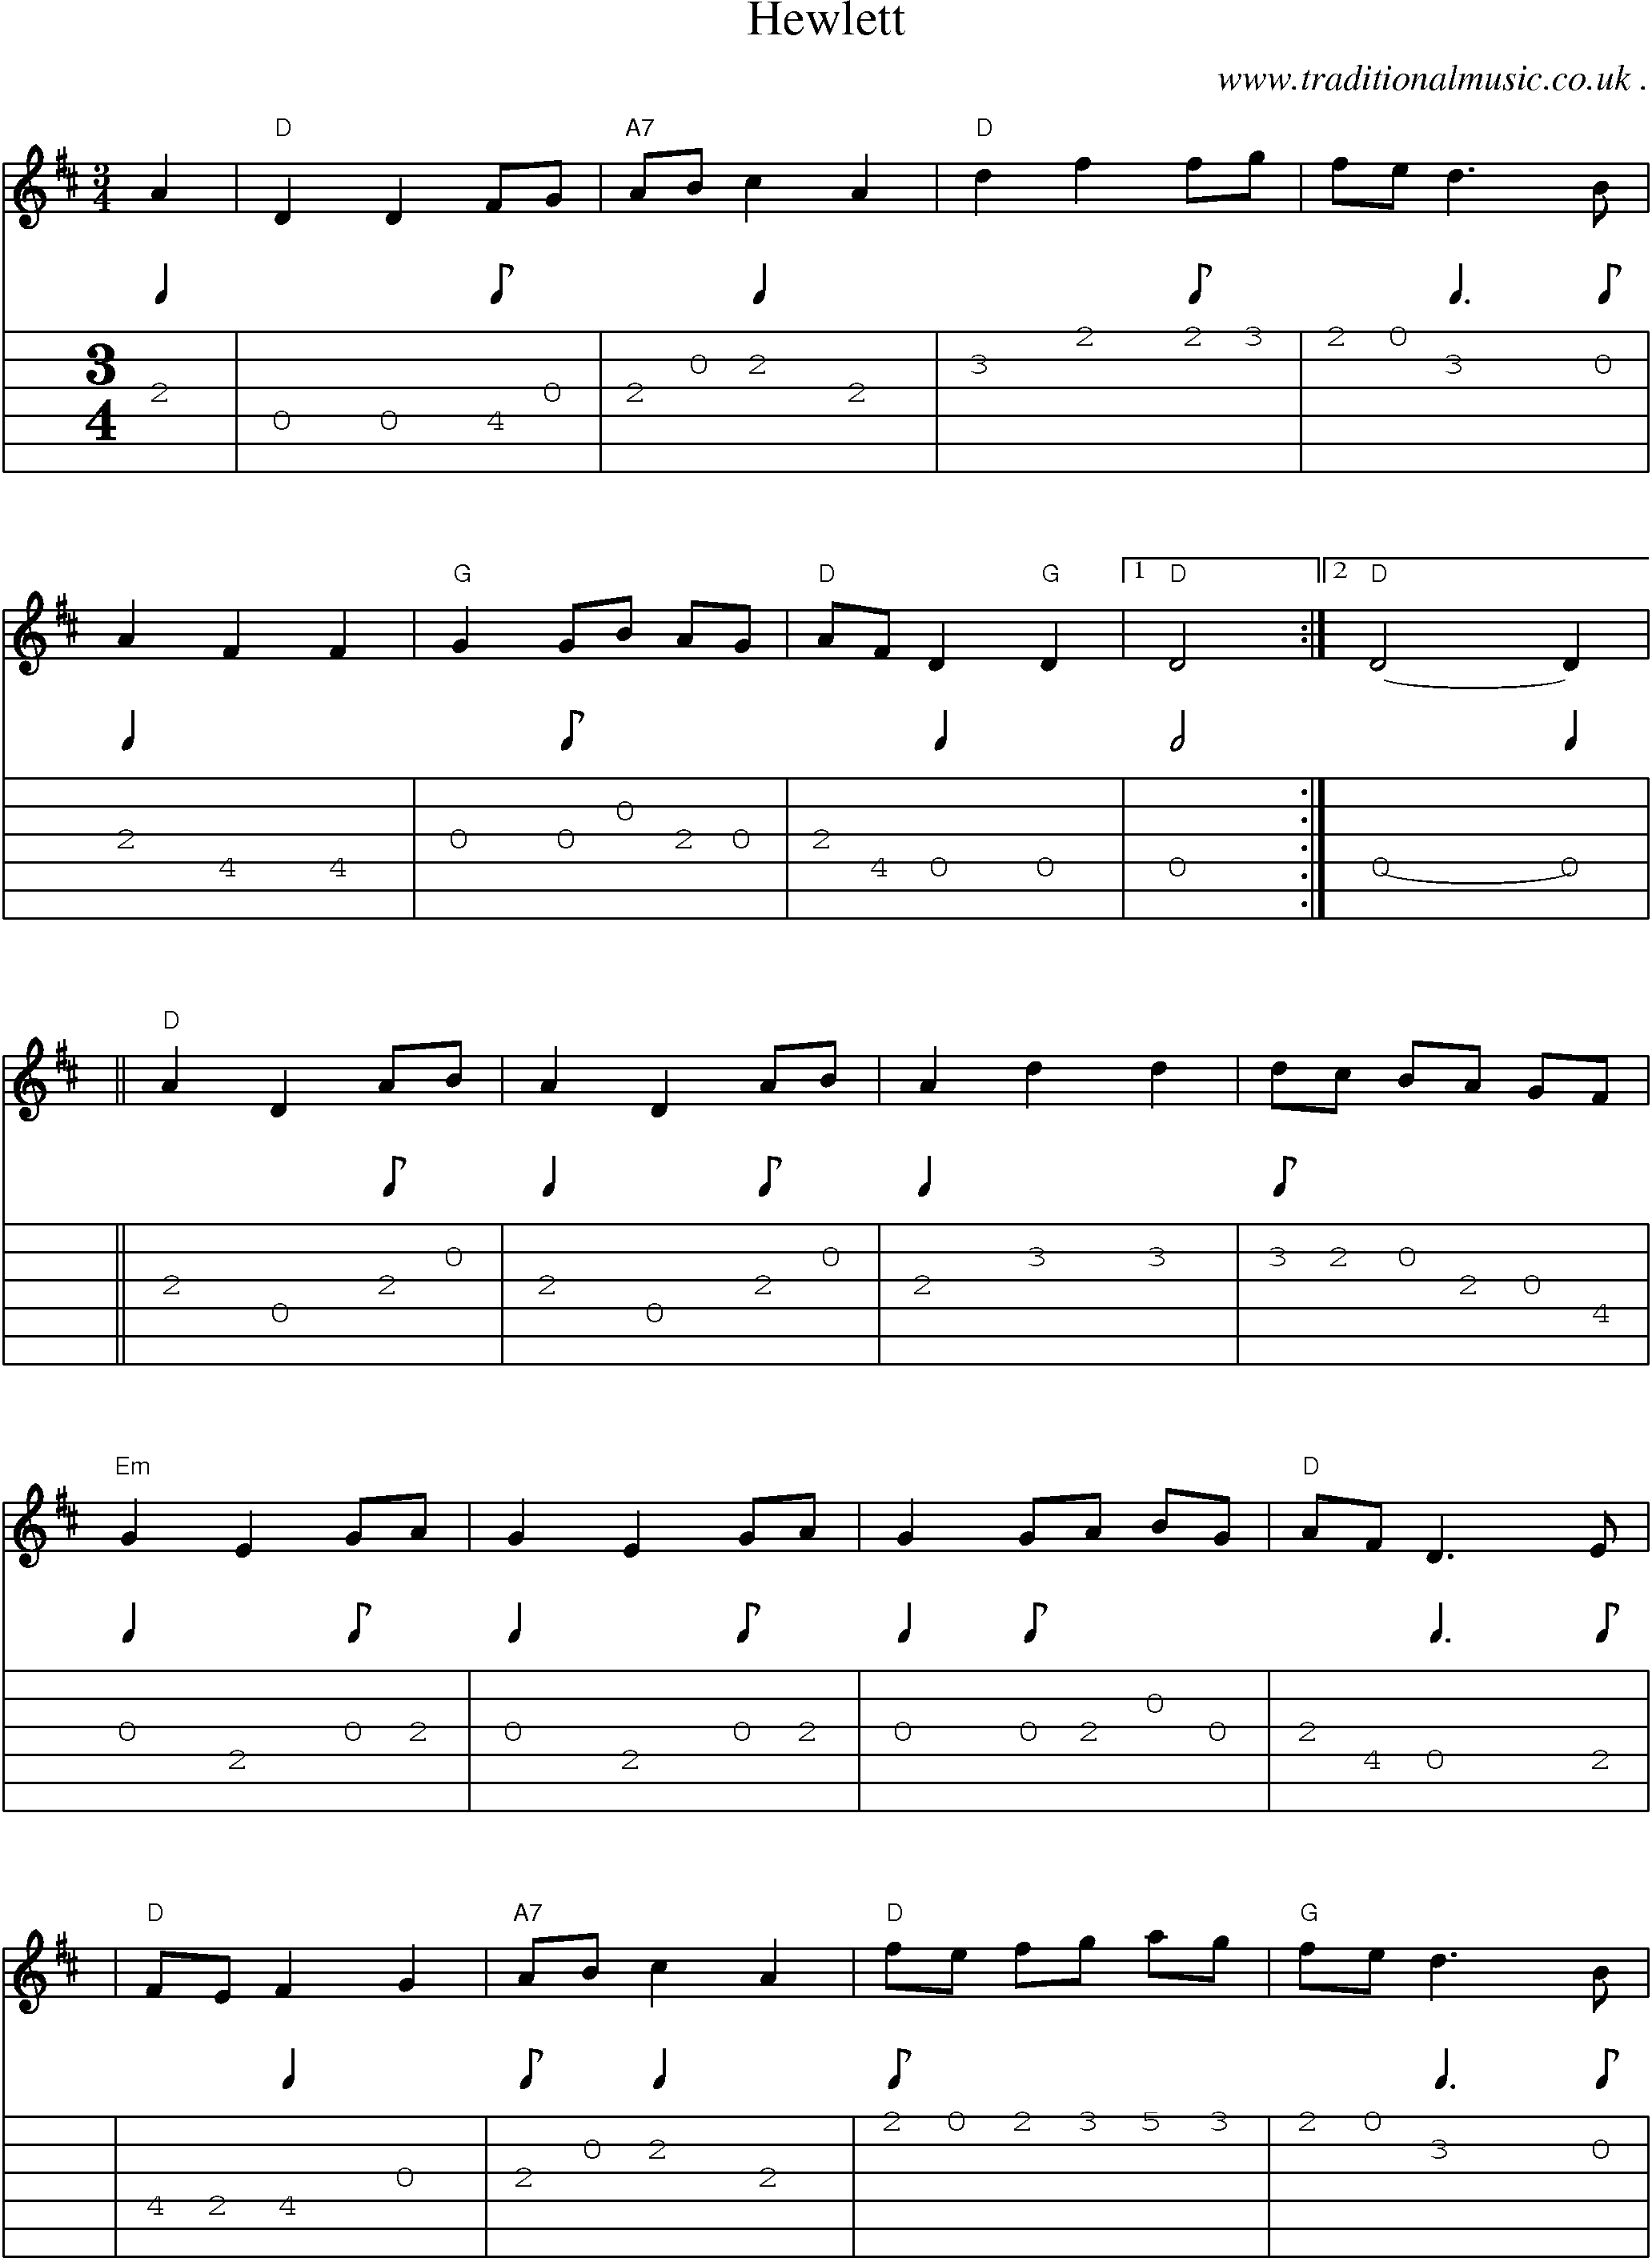 Music Score and Guitar Tabs for Hewlett